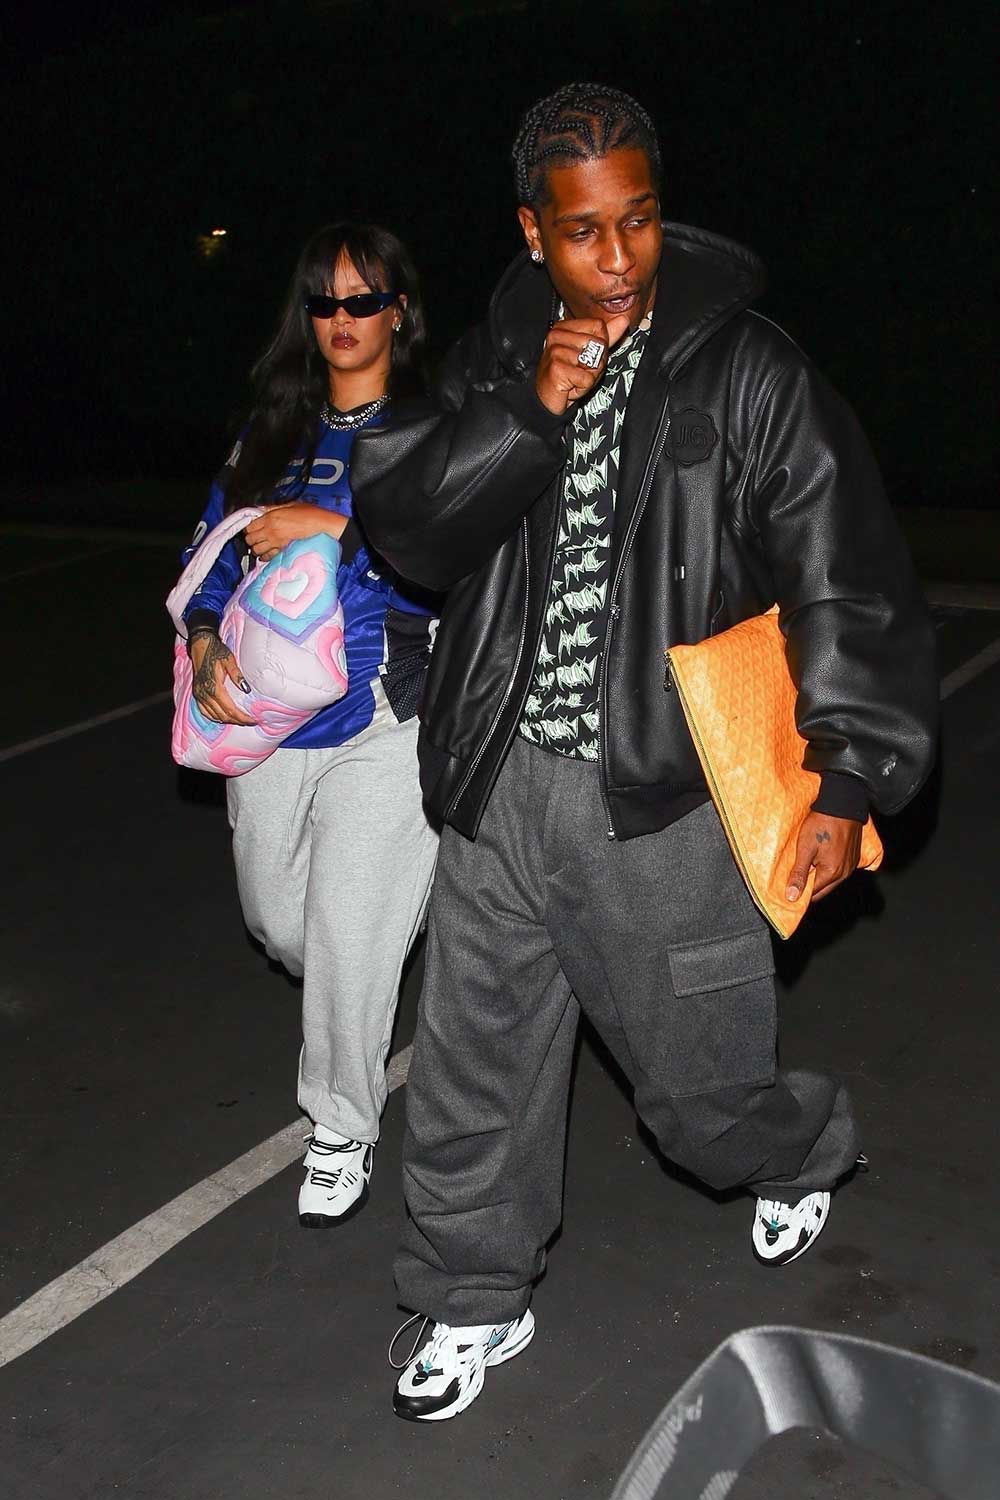 Rihanna Looks Cool in an All-Leather Look for Date Night with A$AP